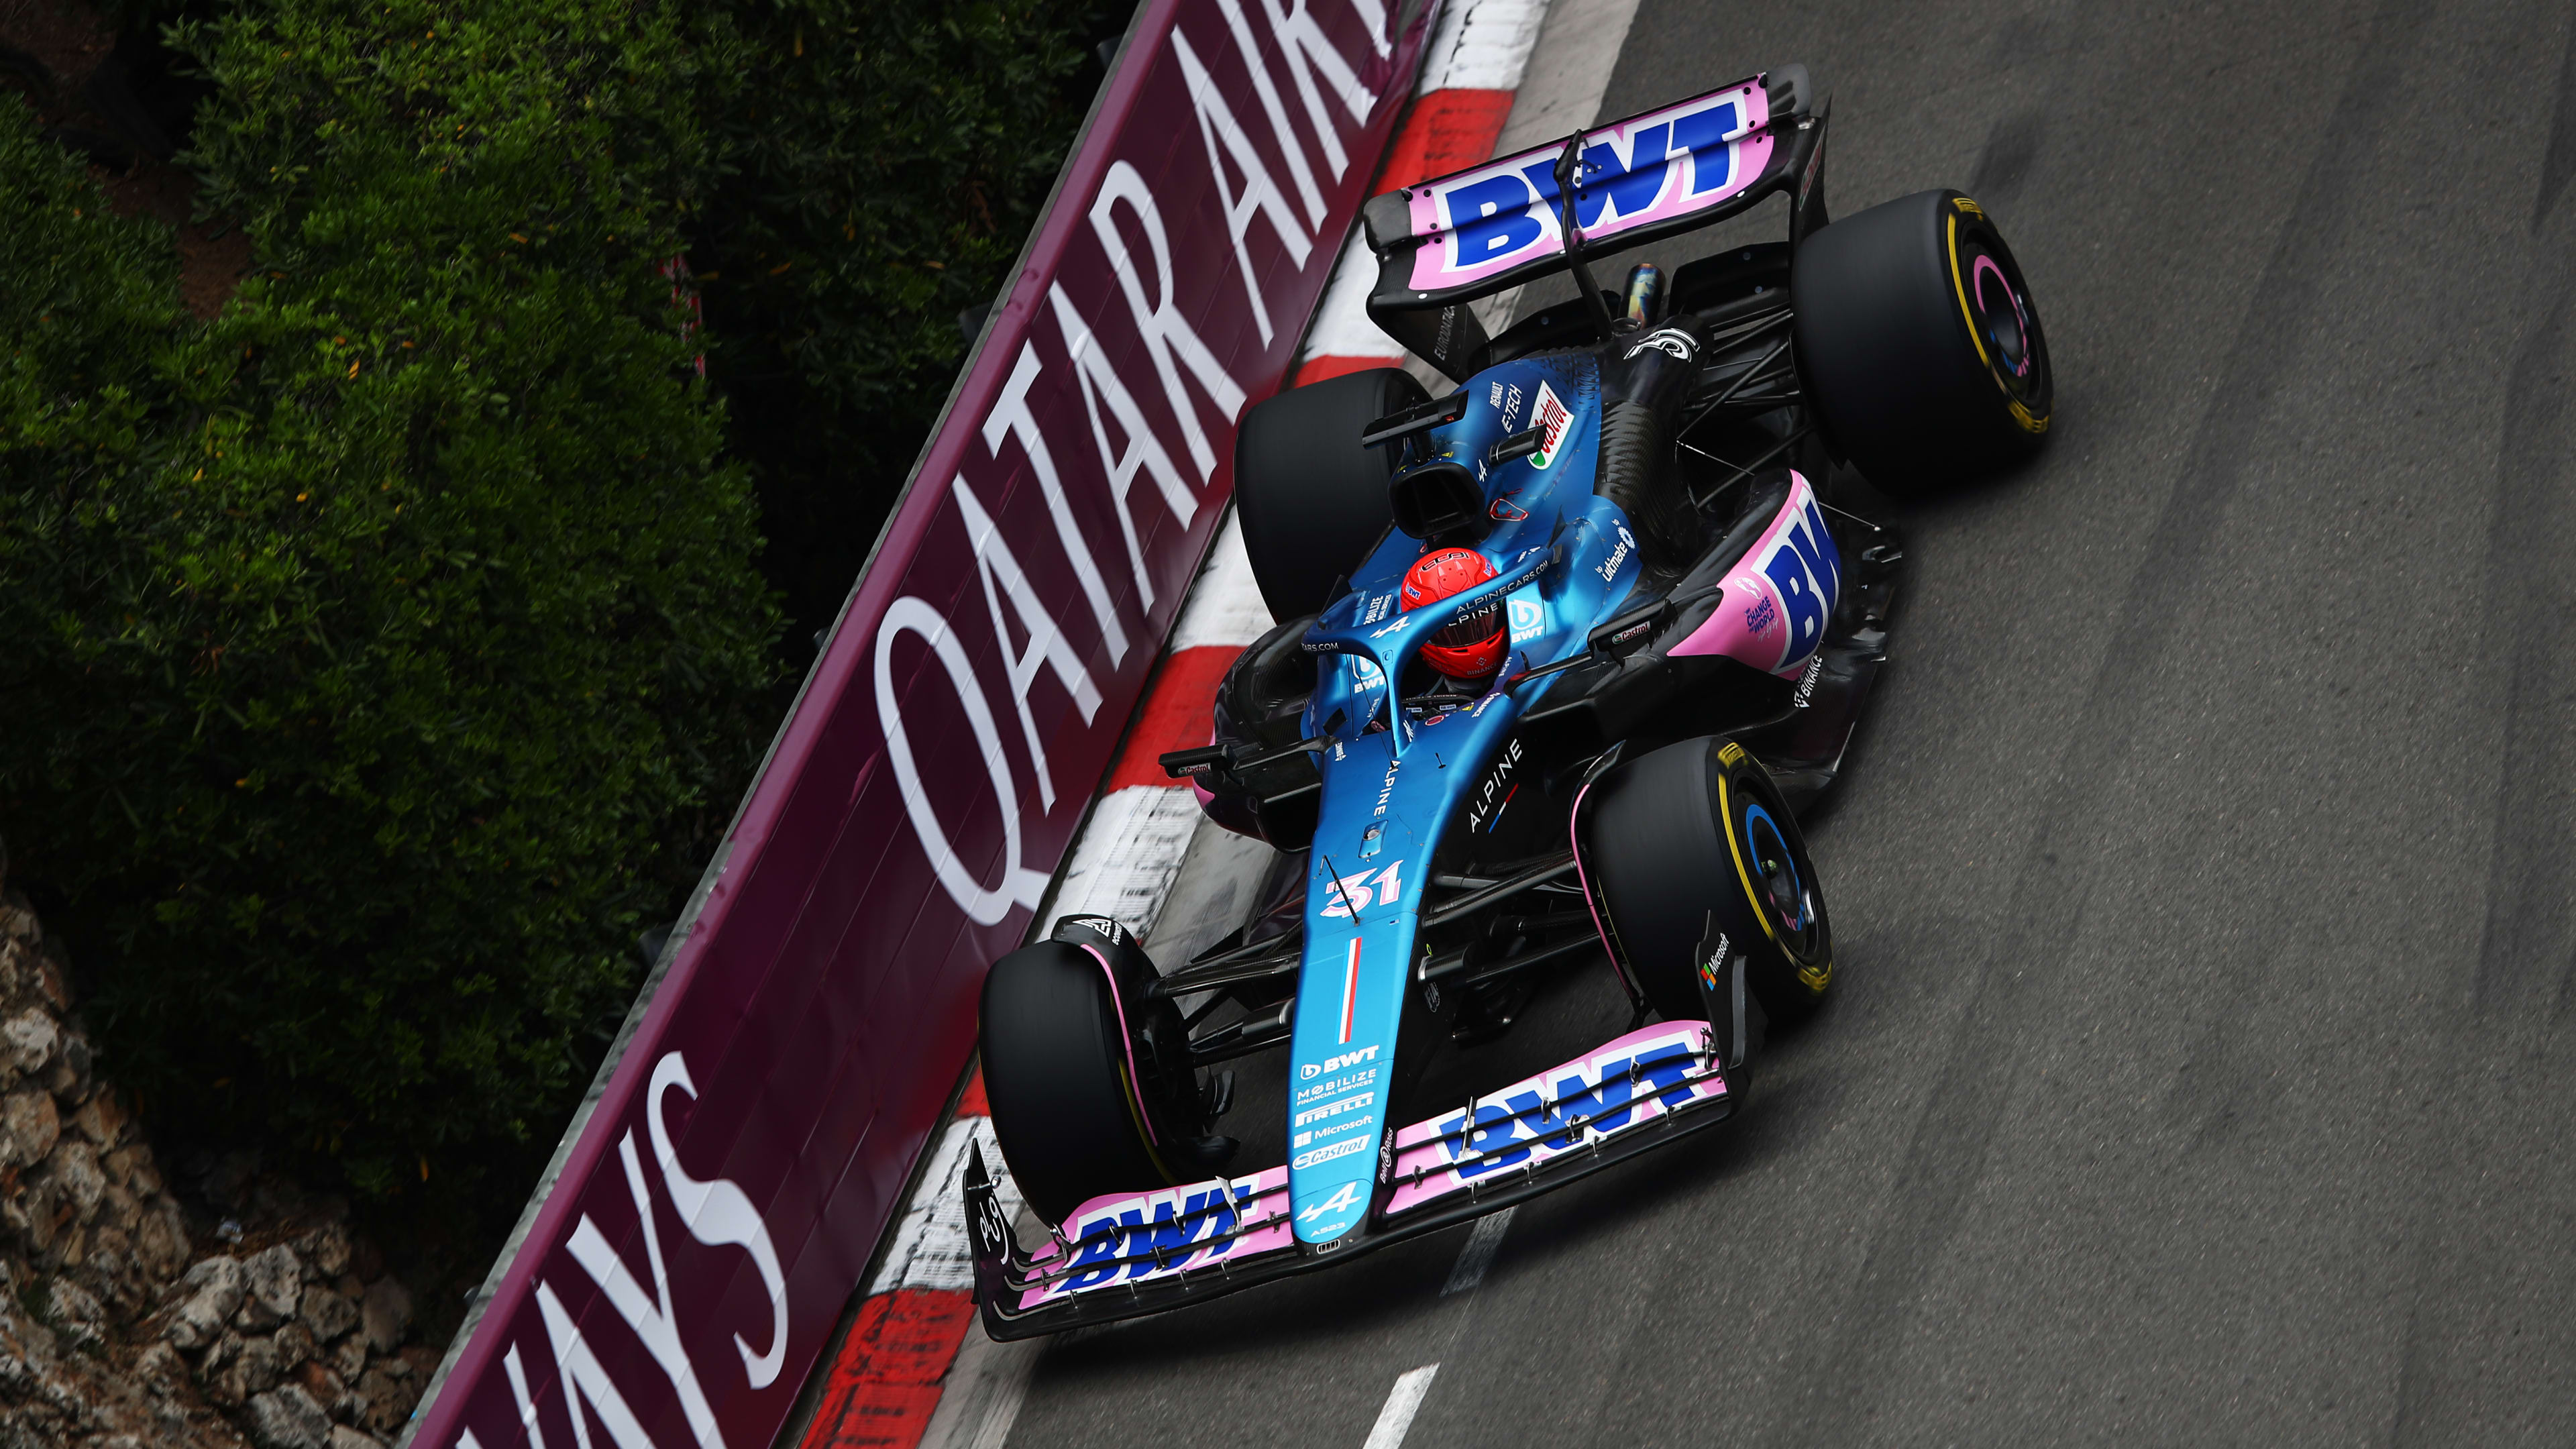 BWT ALPINE F1 TEAM GEARS UP FOR 2023 FORMULA 1 SEASON BY UNVEILING